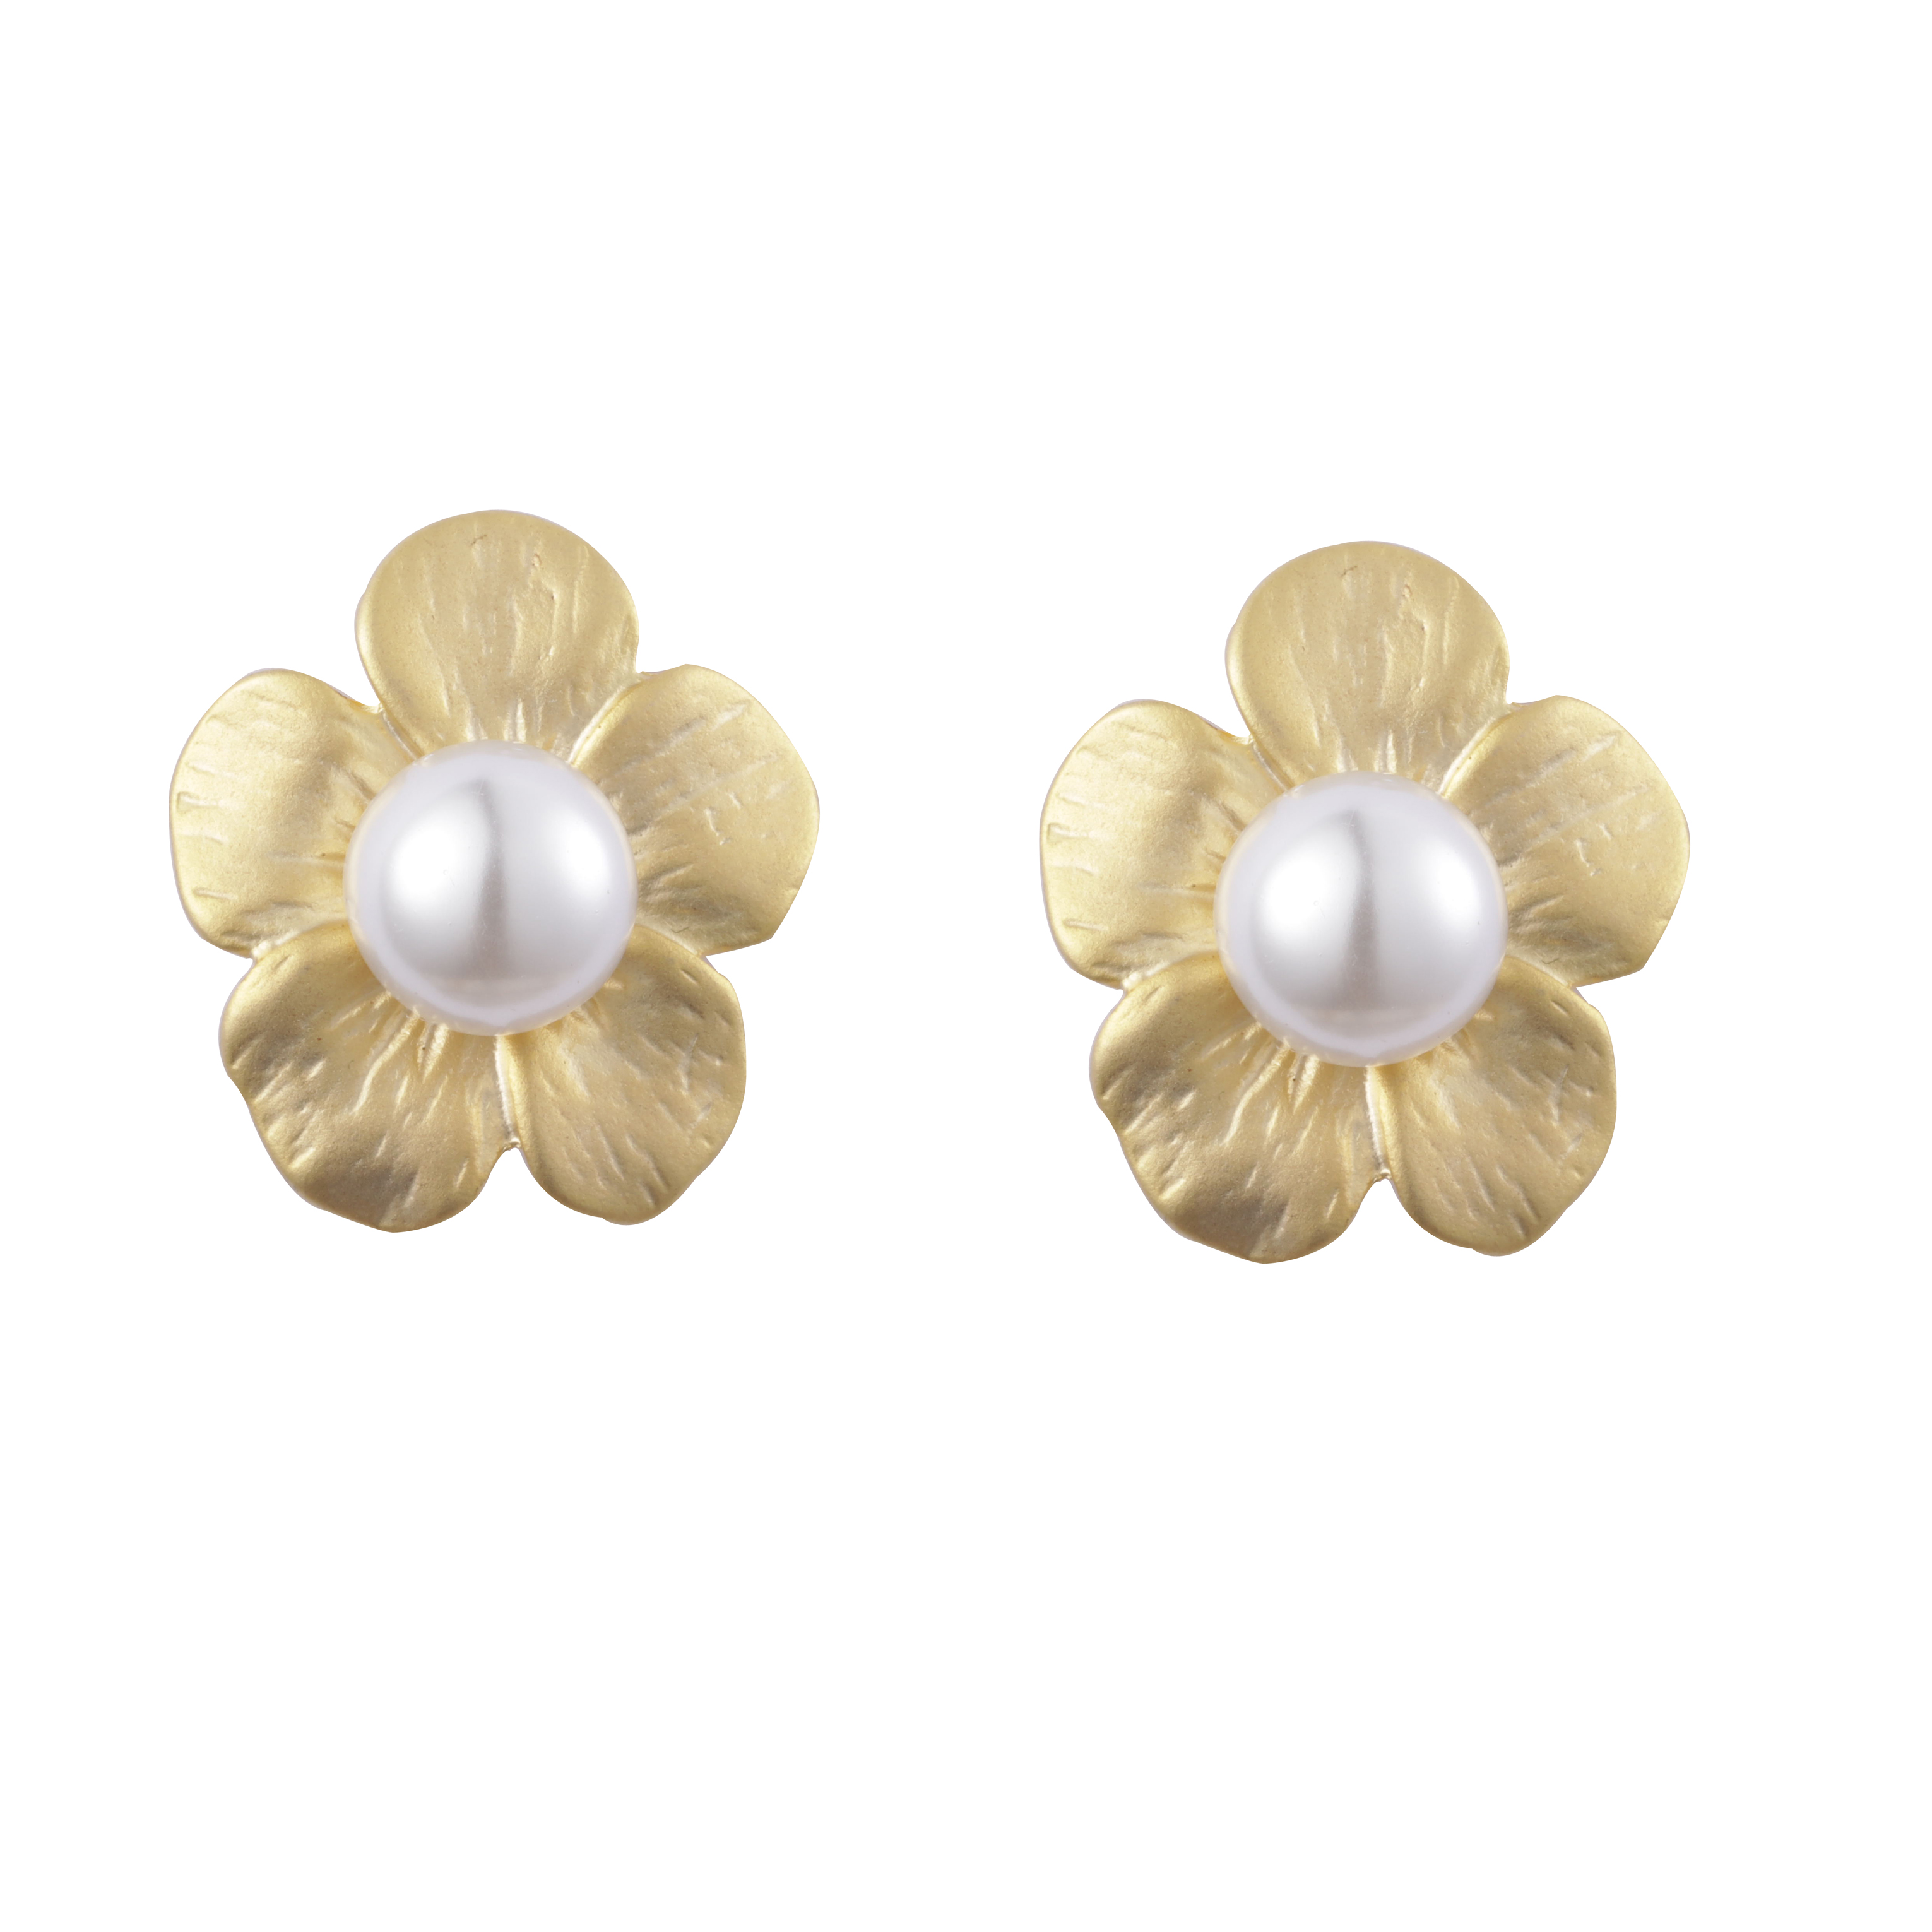 Supply High Quality Flower Pattern Pearl Decorated Fashion Earrings 14k Gold Plated Matte Effect